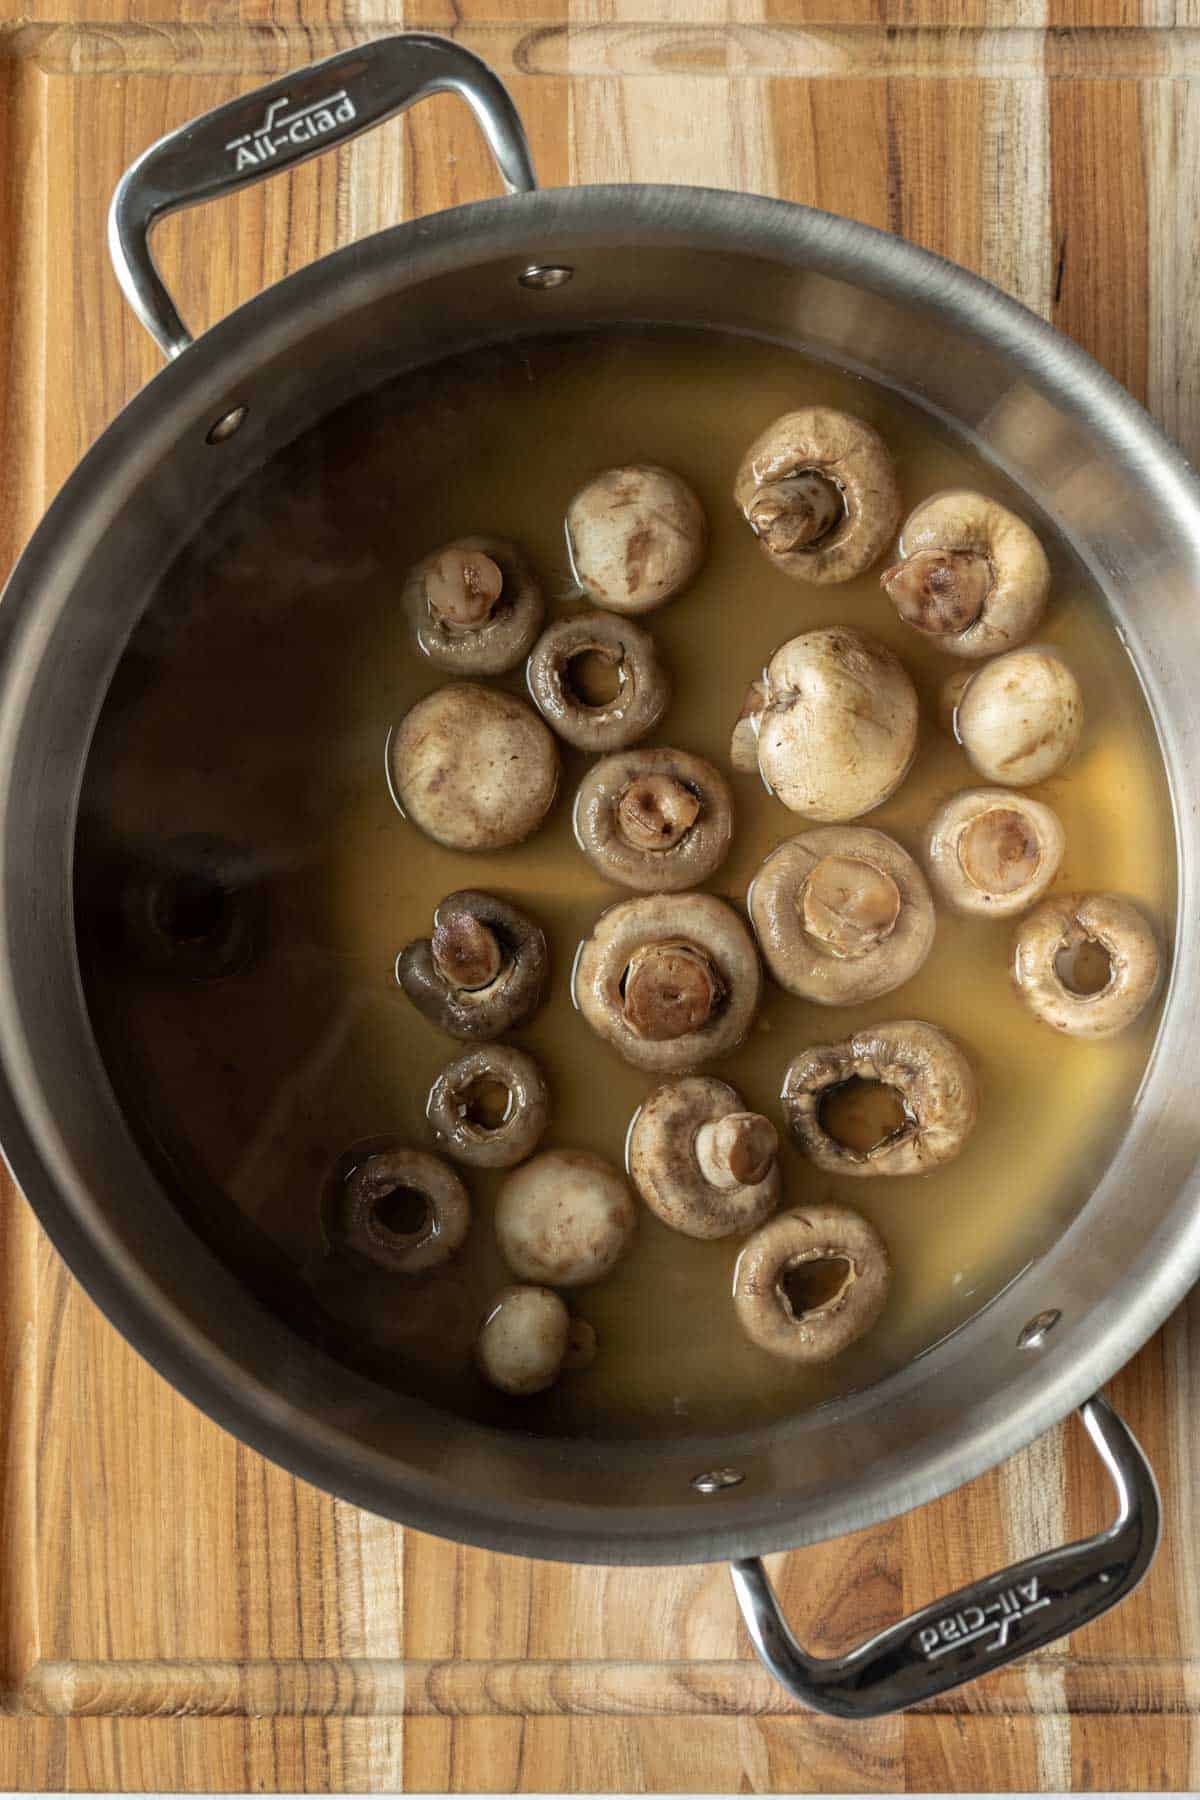 boiling mushrooms in a large pot to serve as sub for hard boiled eggs.